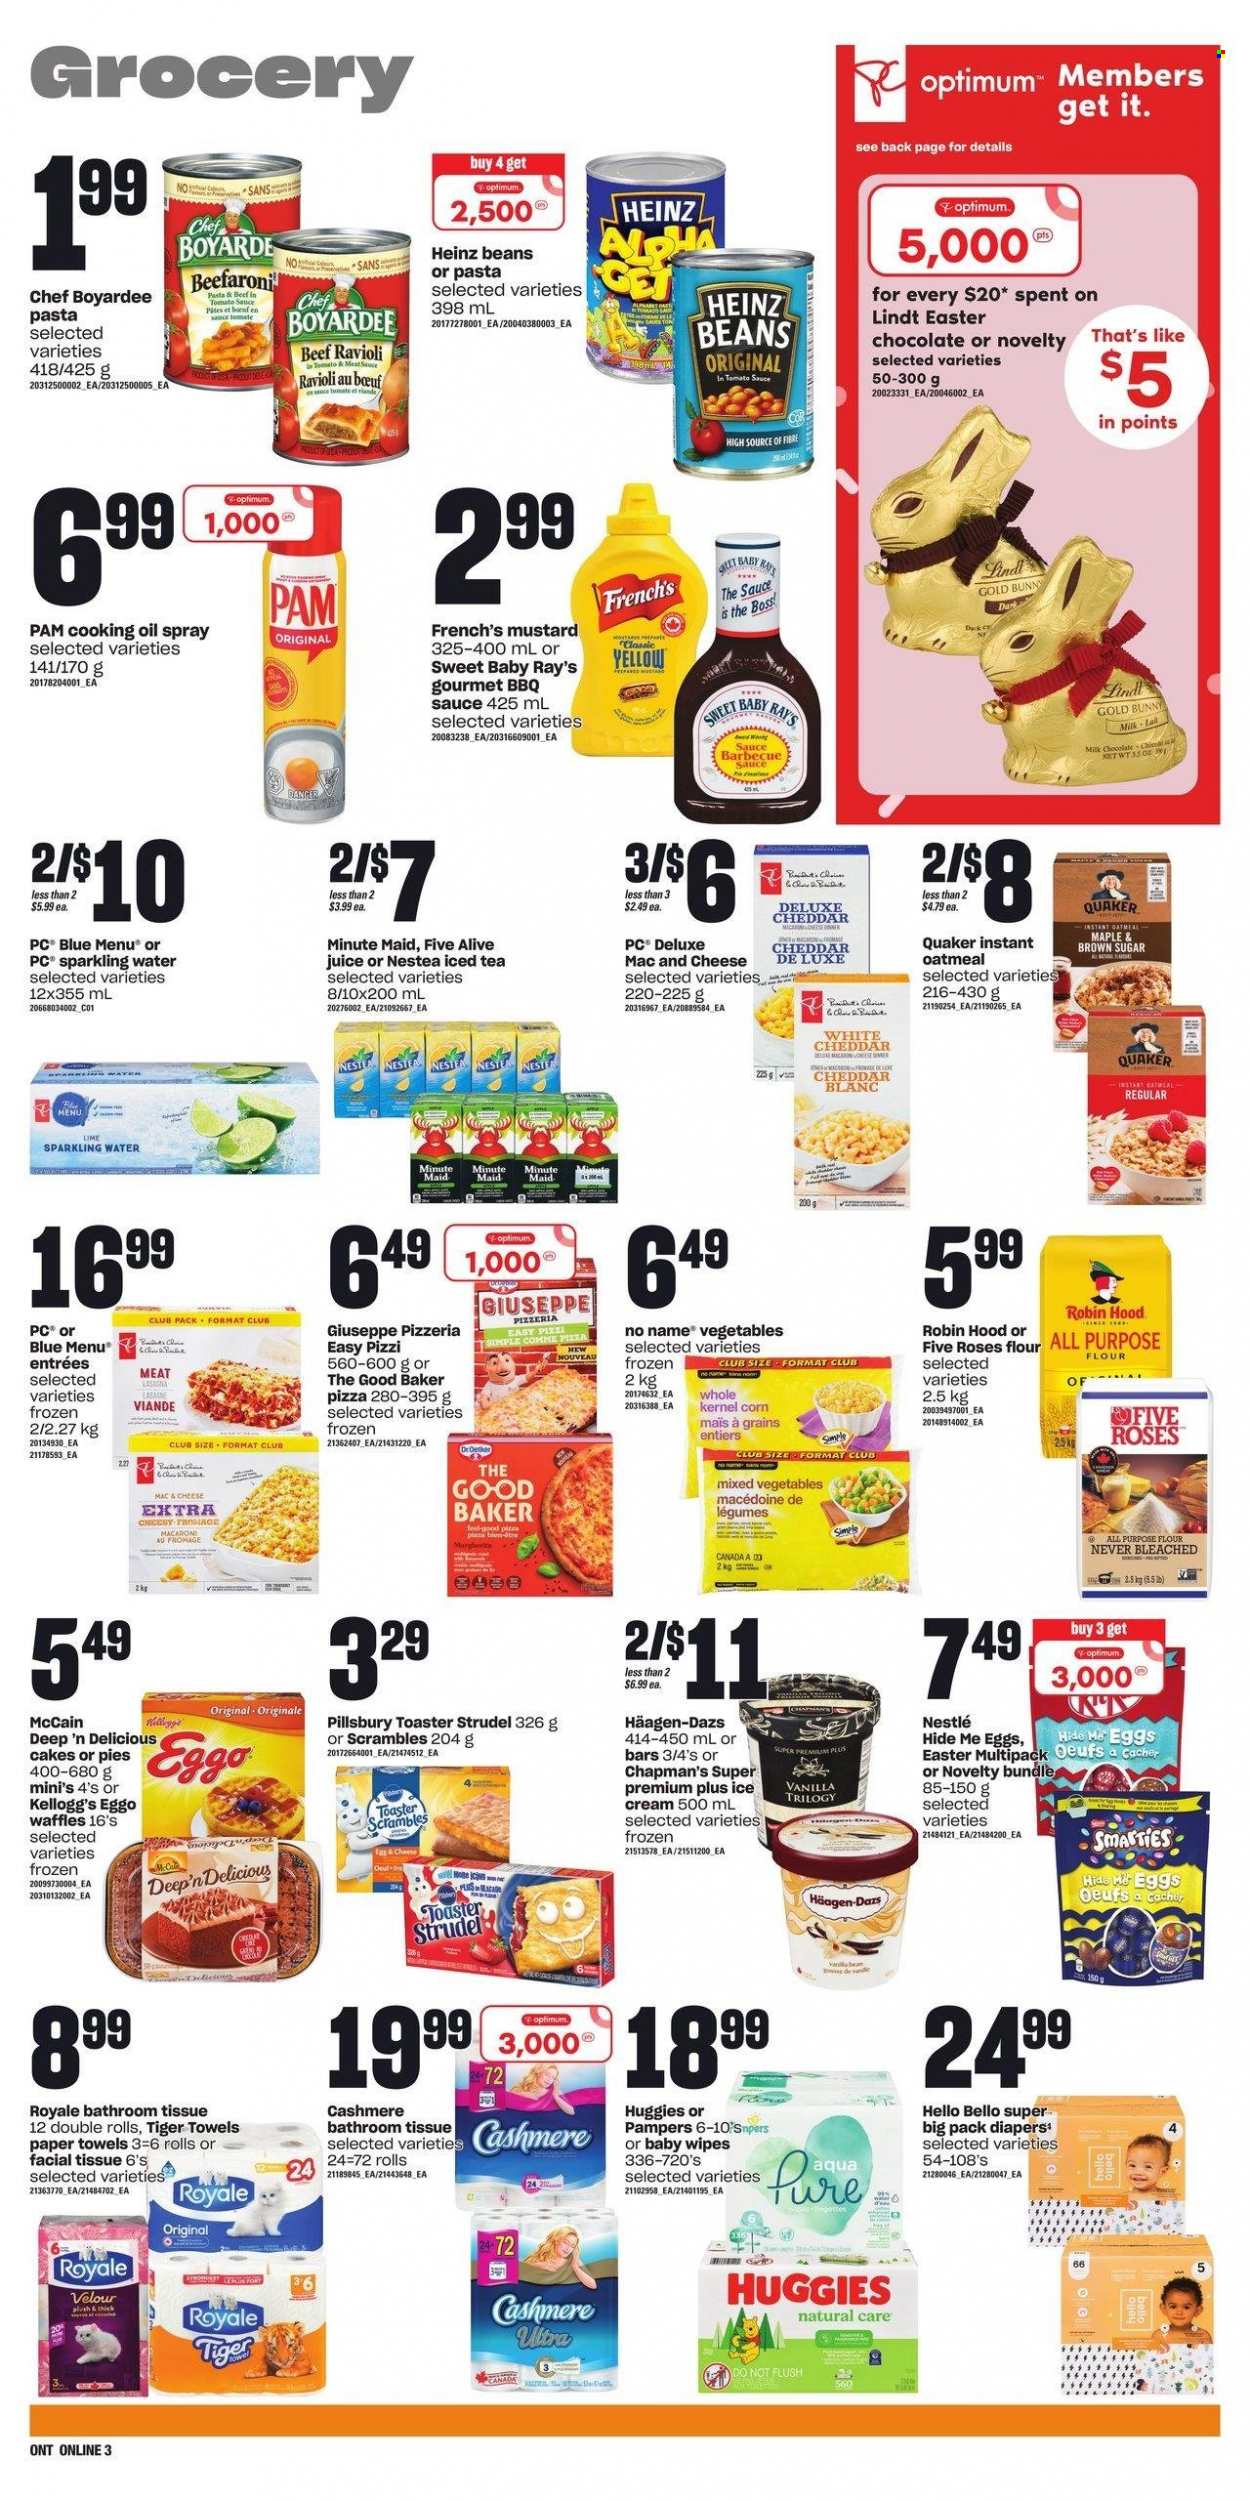 thumbnail - Loblaws Flyer - March 16, 2023 - March 22, 2023 - Sales products - cake, strudel, waffles, beans, corn, No Name, ravioli, pizza, Pillsbury, Quaker, cheddar, eggs, ice cream, Häagen-Dazs, mixed vegetables, McCain, milk chocolate, Kellogg's, all purpose flour, cane sugar, flour, oatmeal, Chef Boyardee, BBQ sauce, mustard, oil, cooking oil, juice, ice tea, fruit punch, sparkling water, water, wipes, Pampers, baby wipes, nappies, bath tissue, kitchen towels, paper towels, Optimum, Nestlé, Heinz, Huggies, Lindt, Smarties. Page 7.